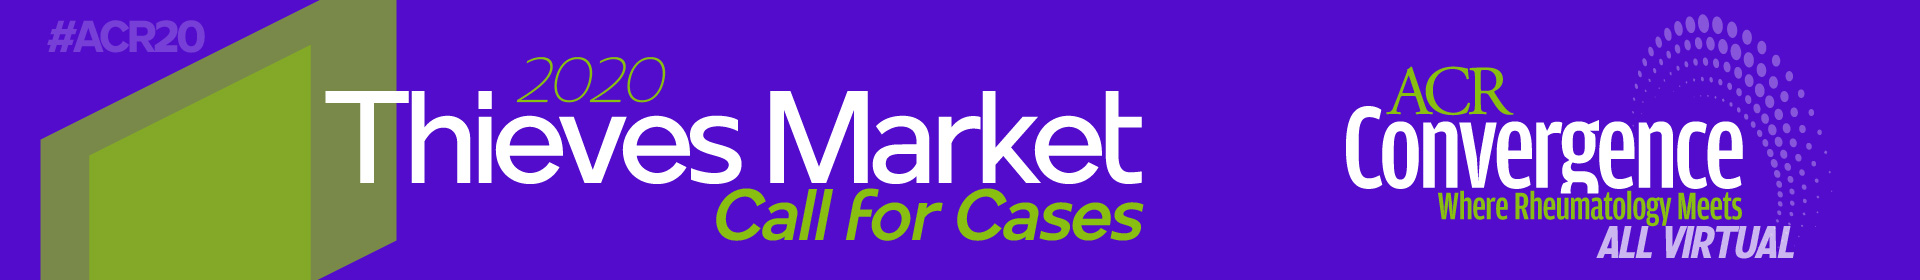 2020 Thieves Market Call for Cases